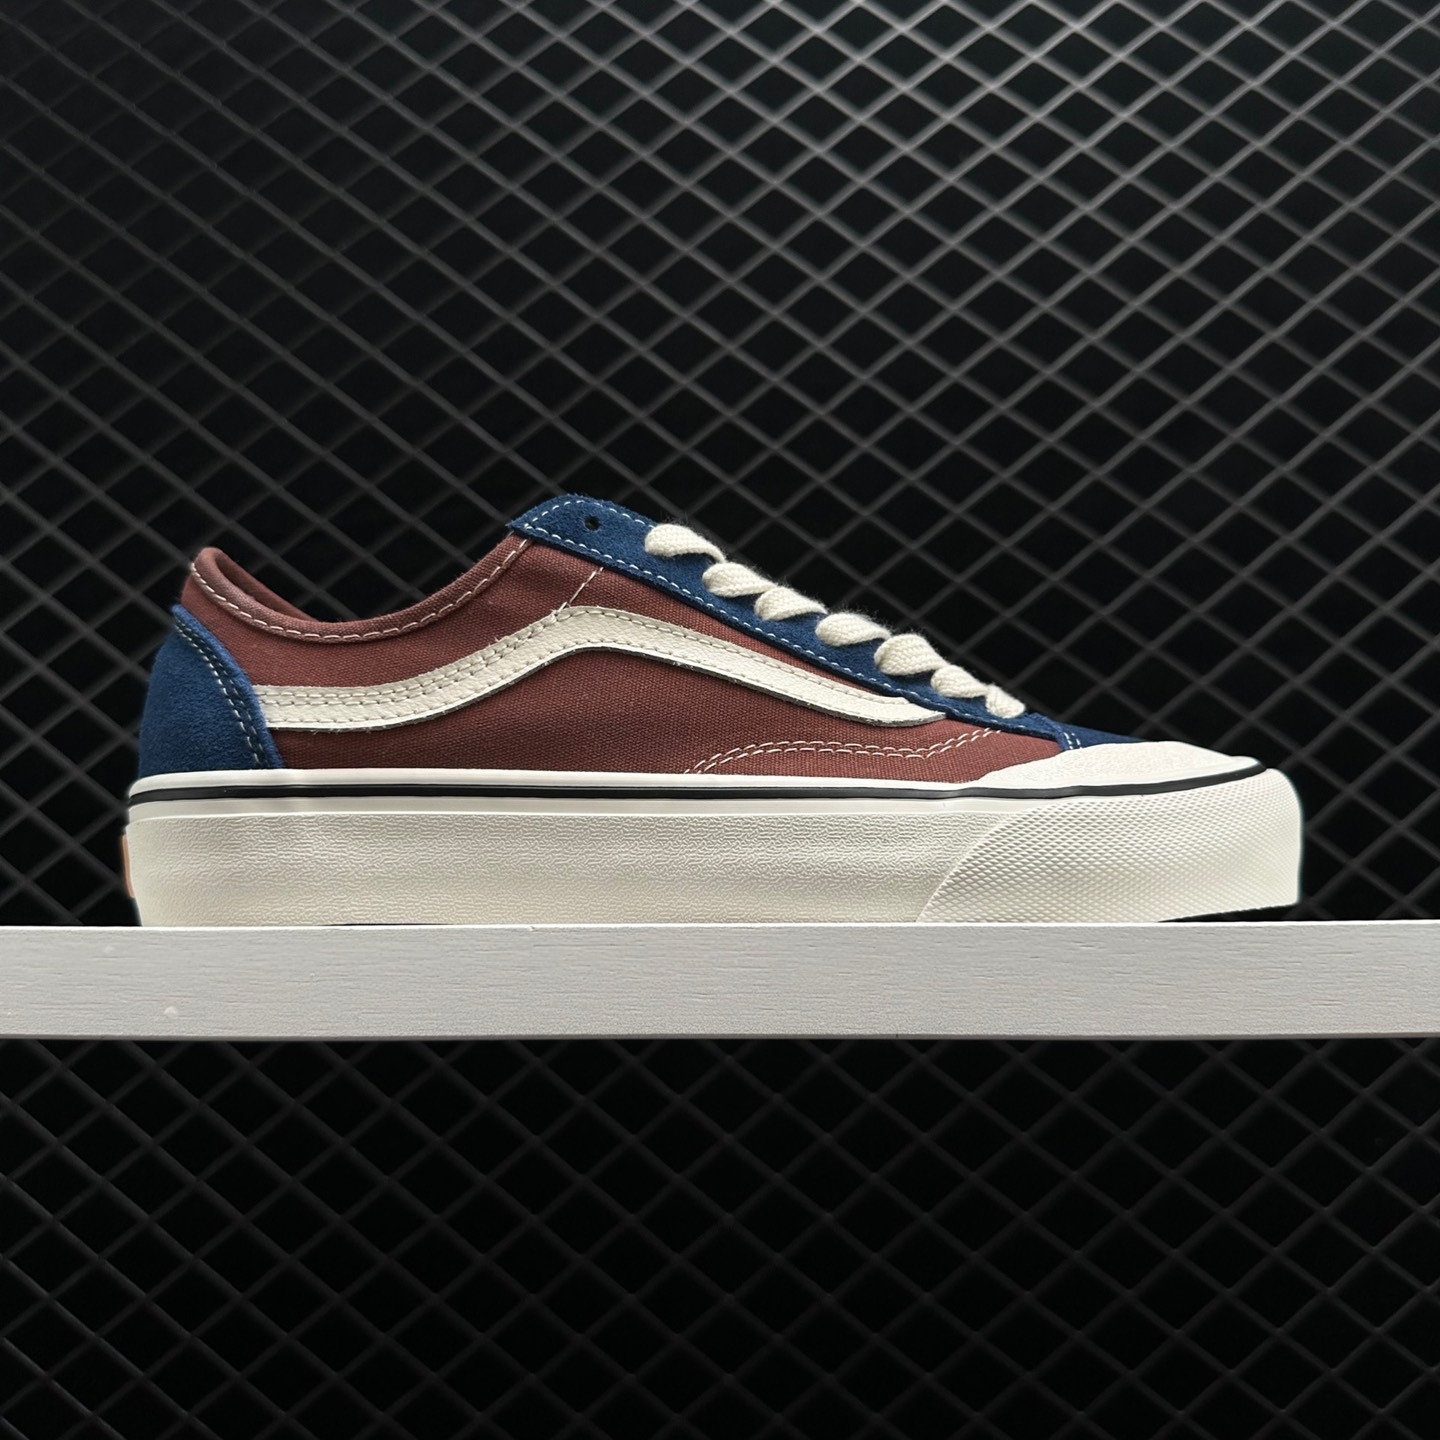 Vans Style 136 'White Red Blue' VN0A4BX9BKM - Classic American design in vibrant colors